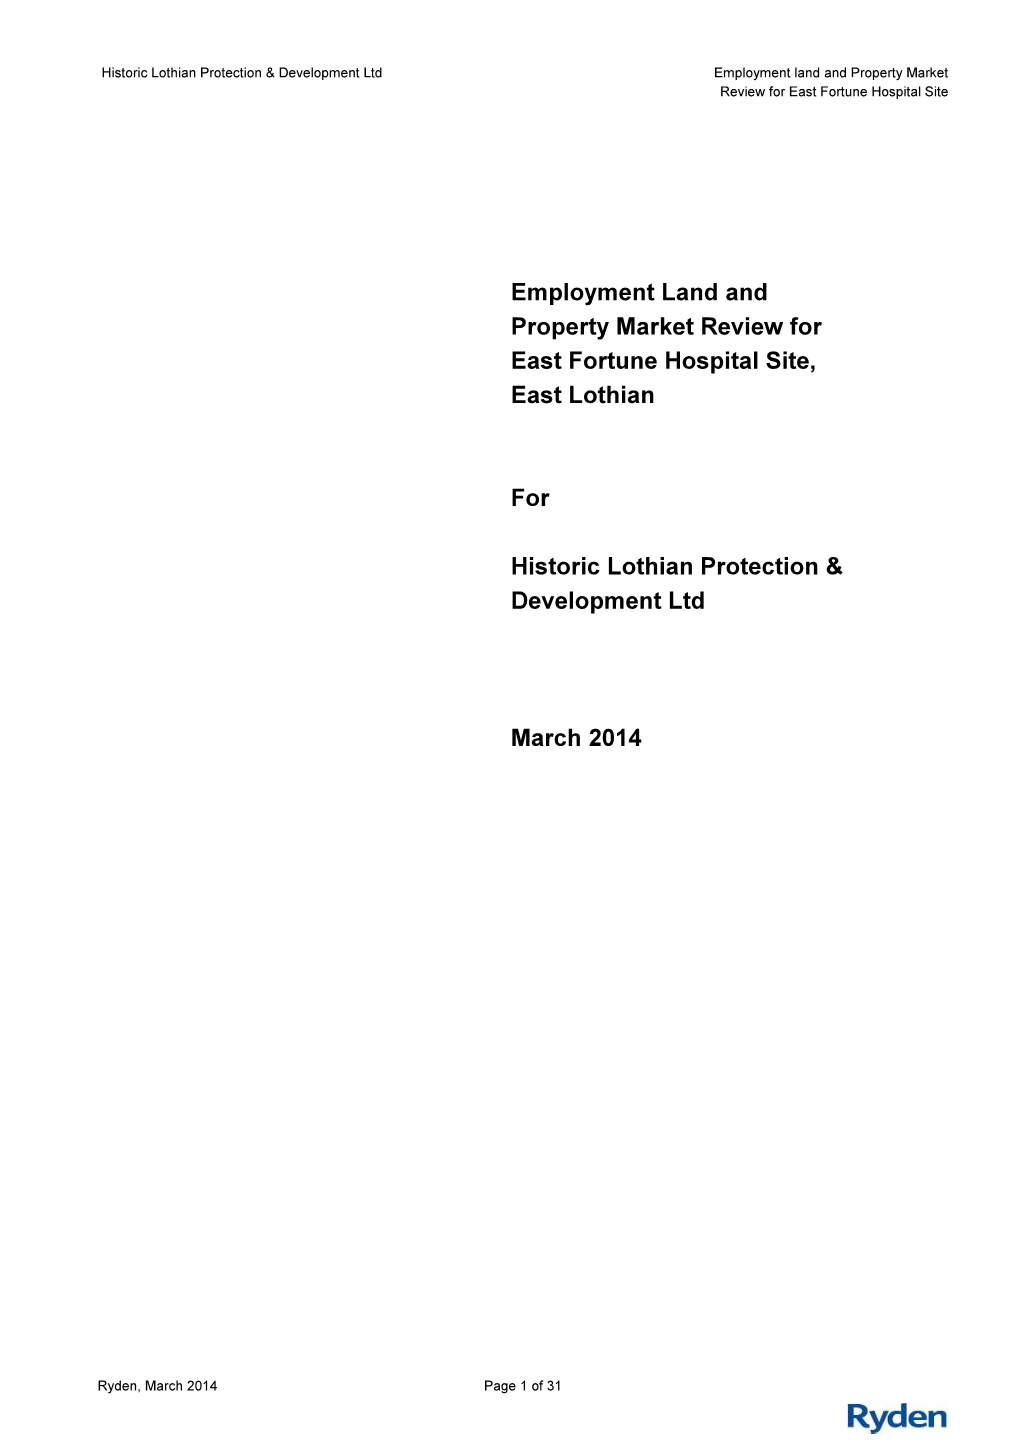 Employment Land and Property Market Review for East Fortune Hospital Site